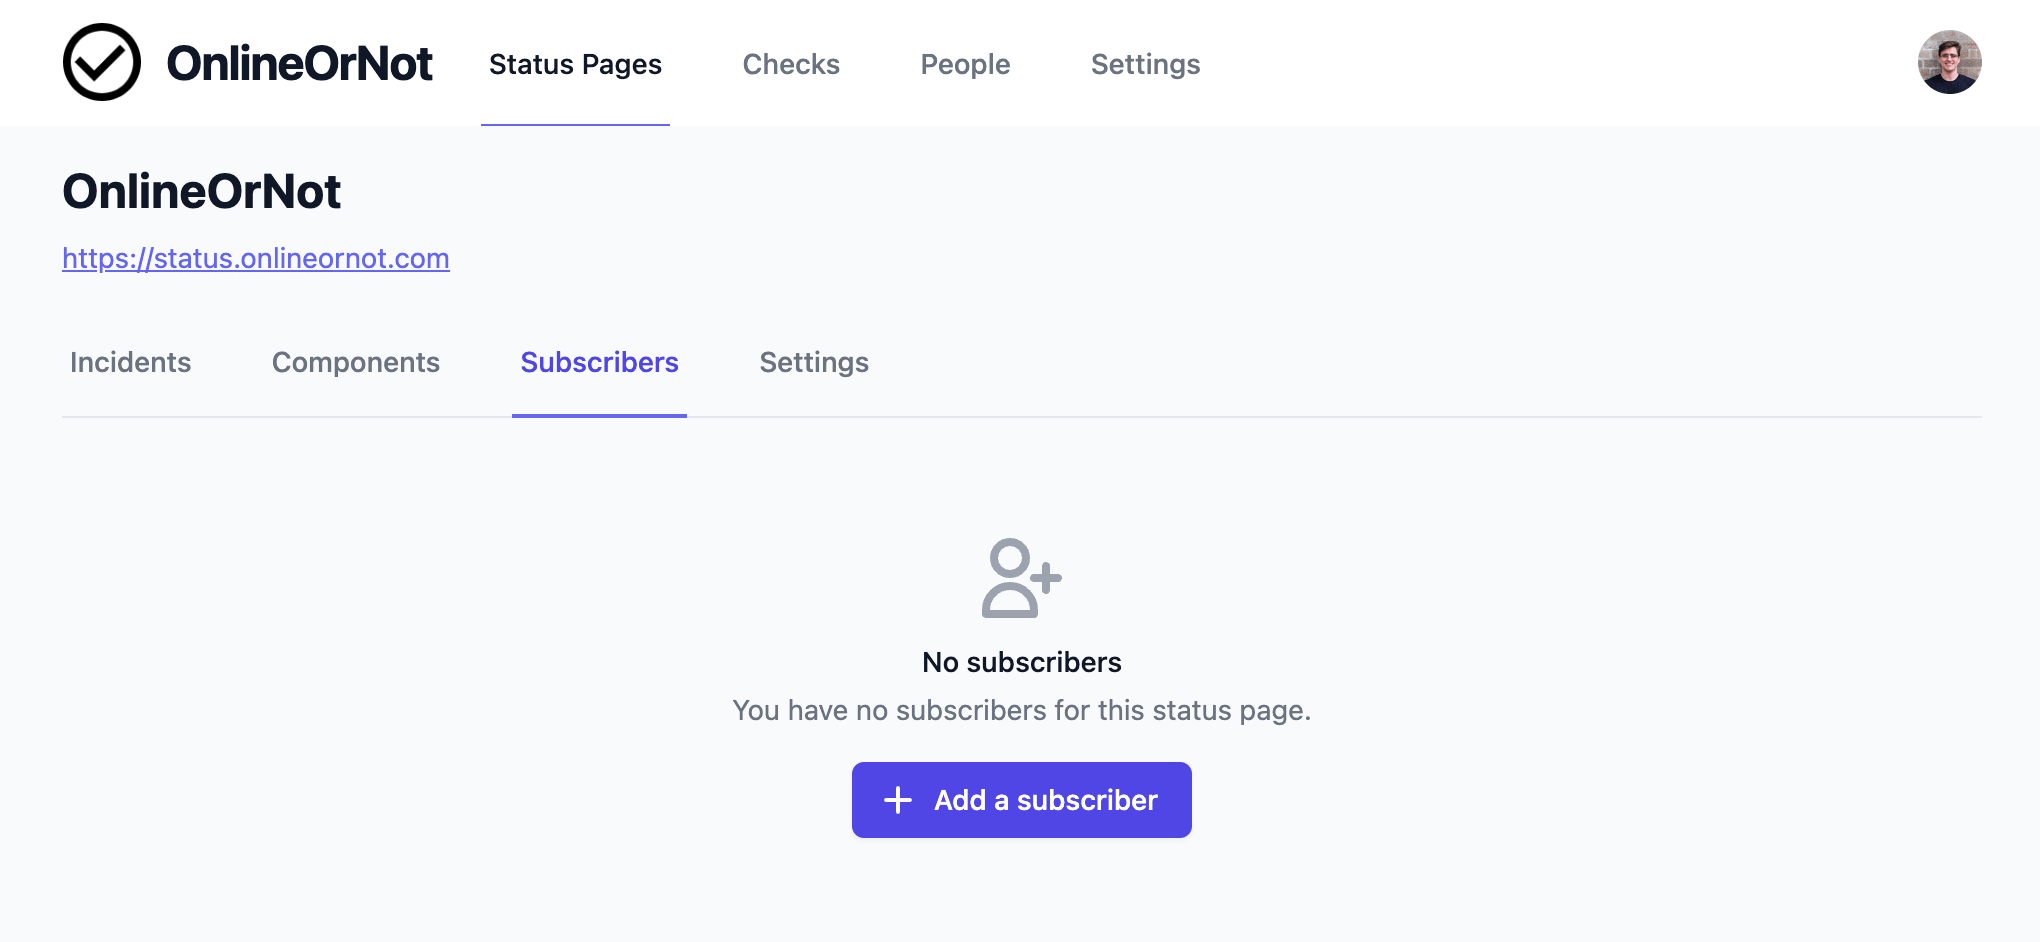 OnlineOrNot Status Pages Add Subscriber Screen